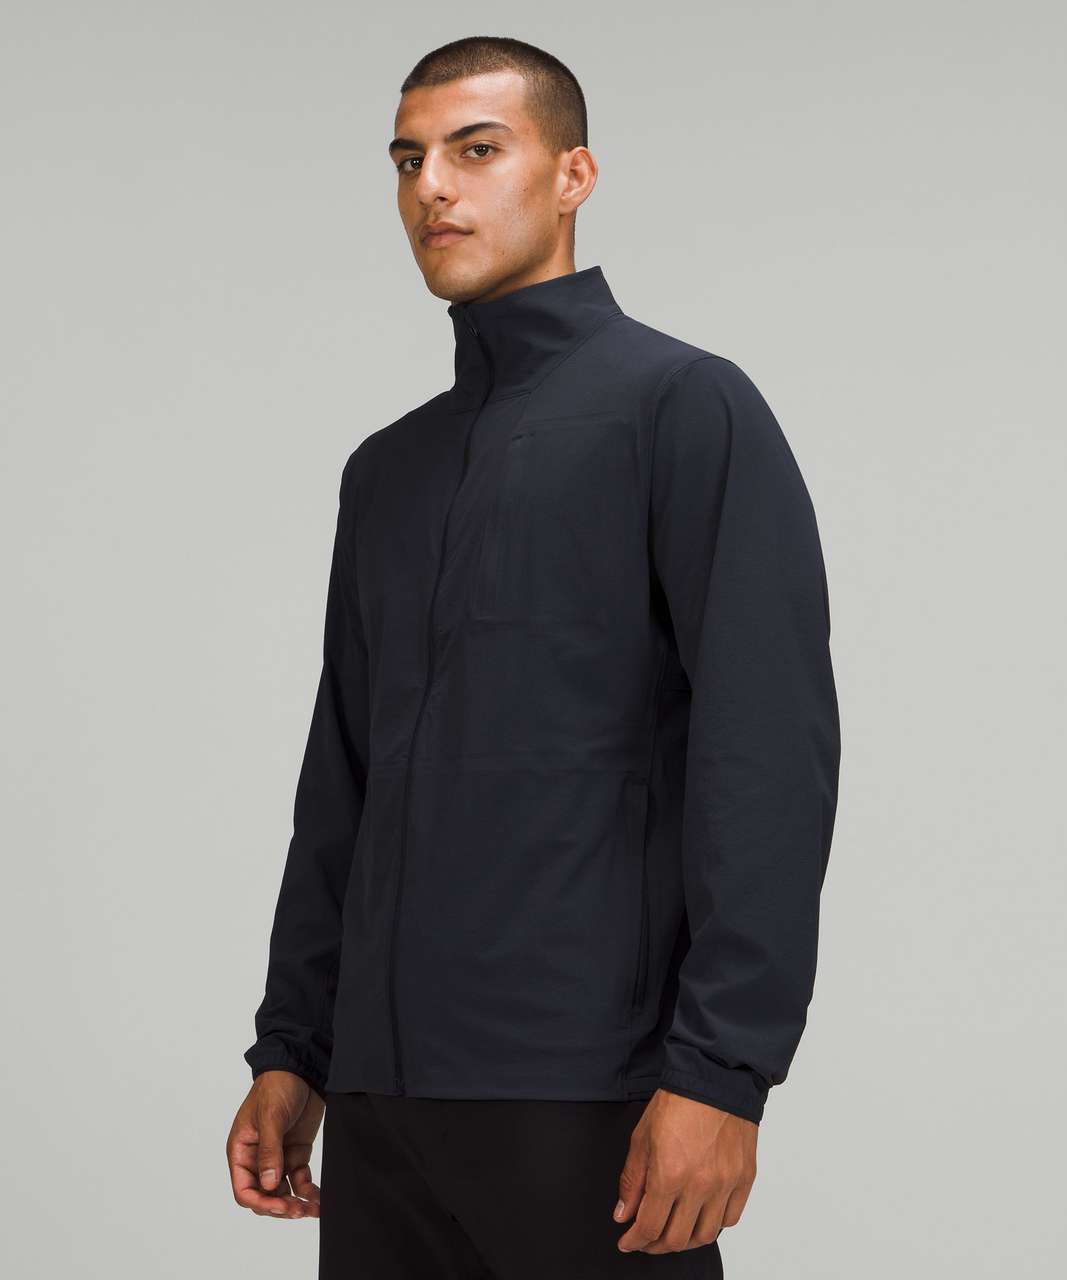 Lululemon Expeditionist Jacket - Classic Navy (First Release)